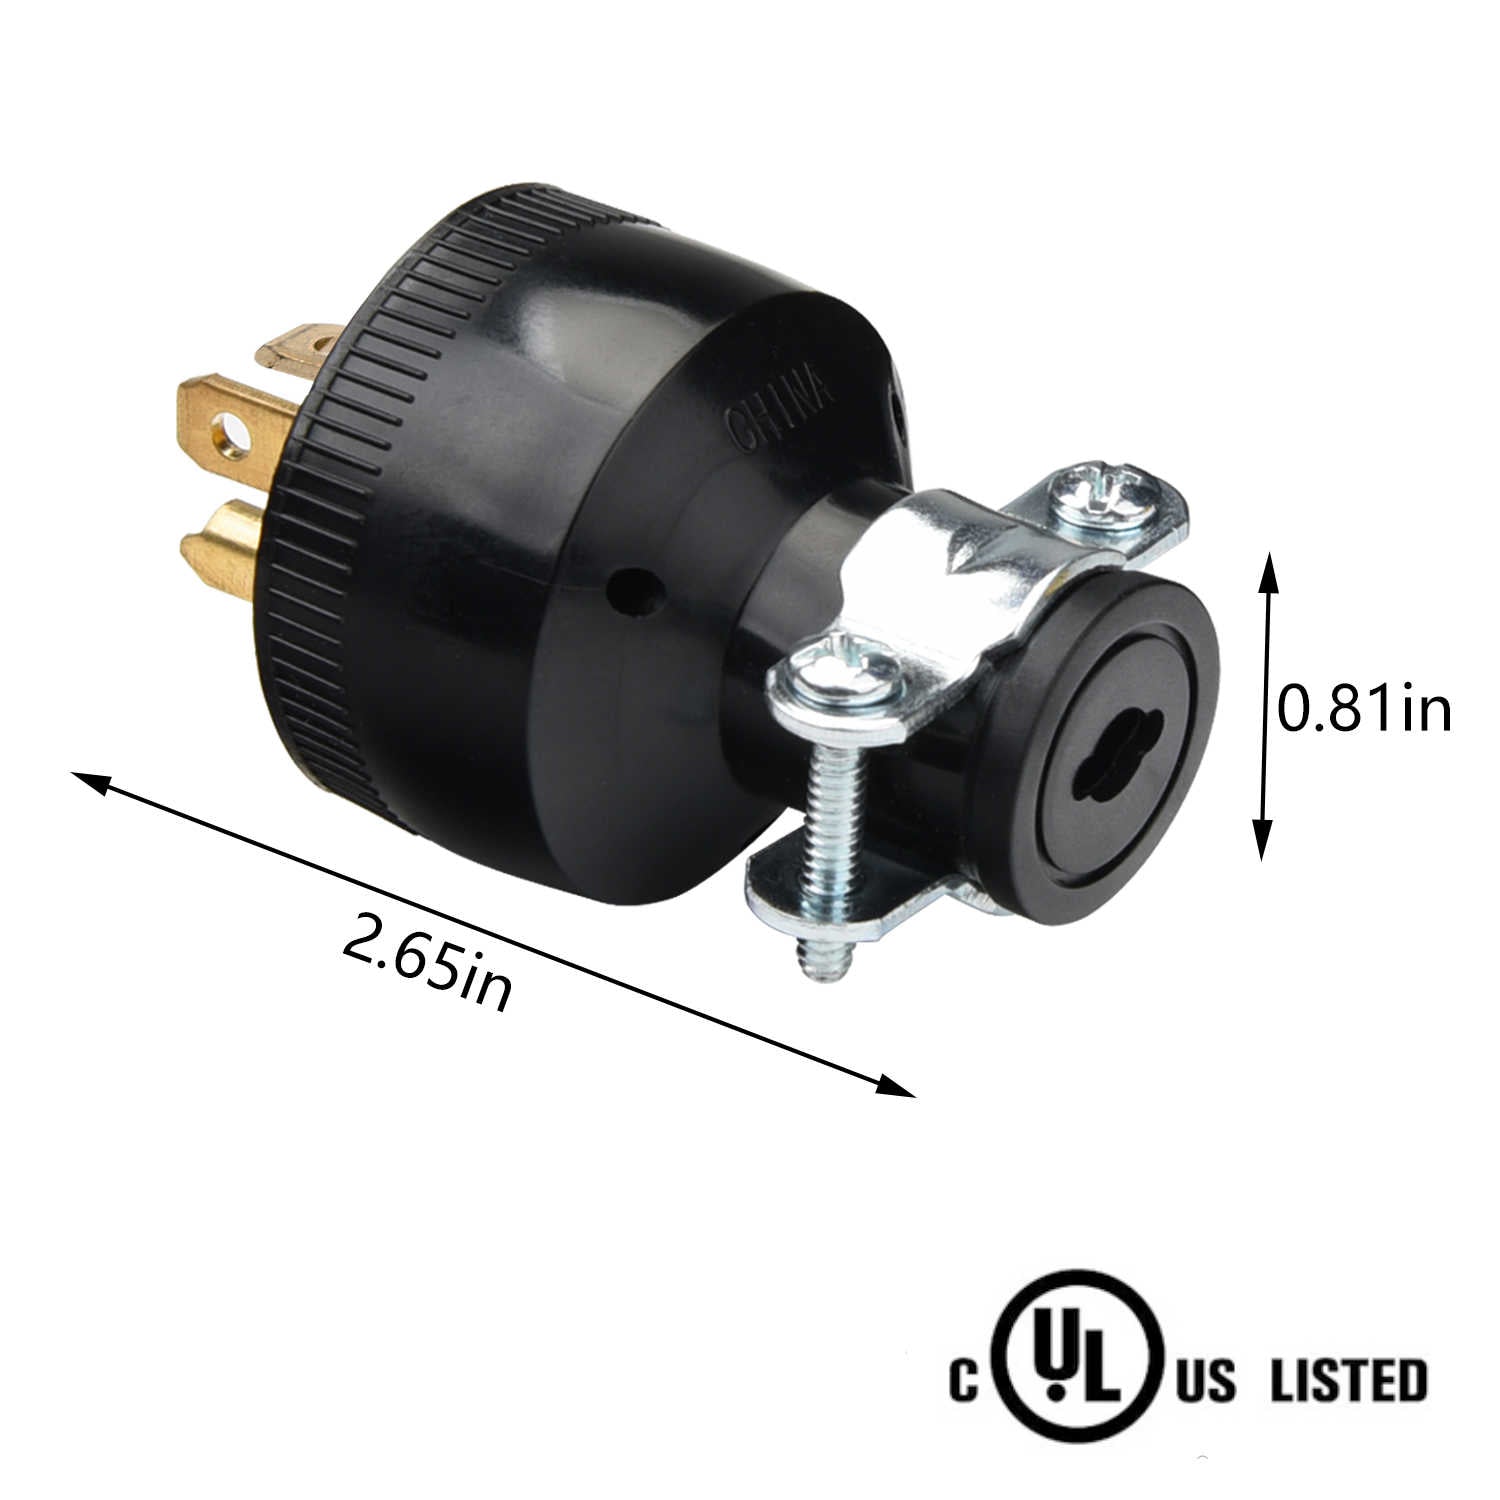 Electrical Replacement Plug Extension Cord End Black Shell 250V 20A 2Pole 3Wire 2